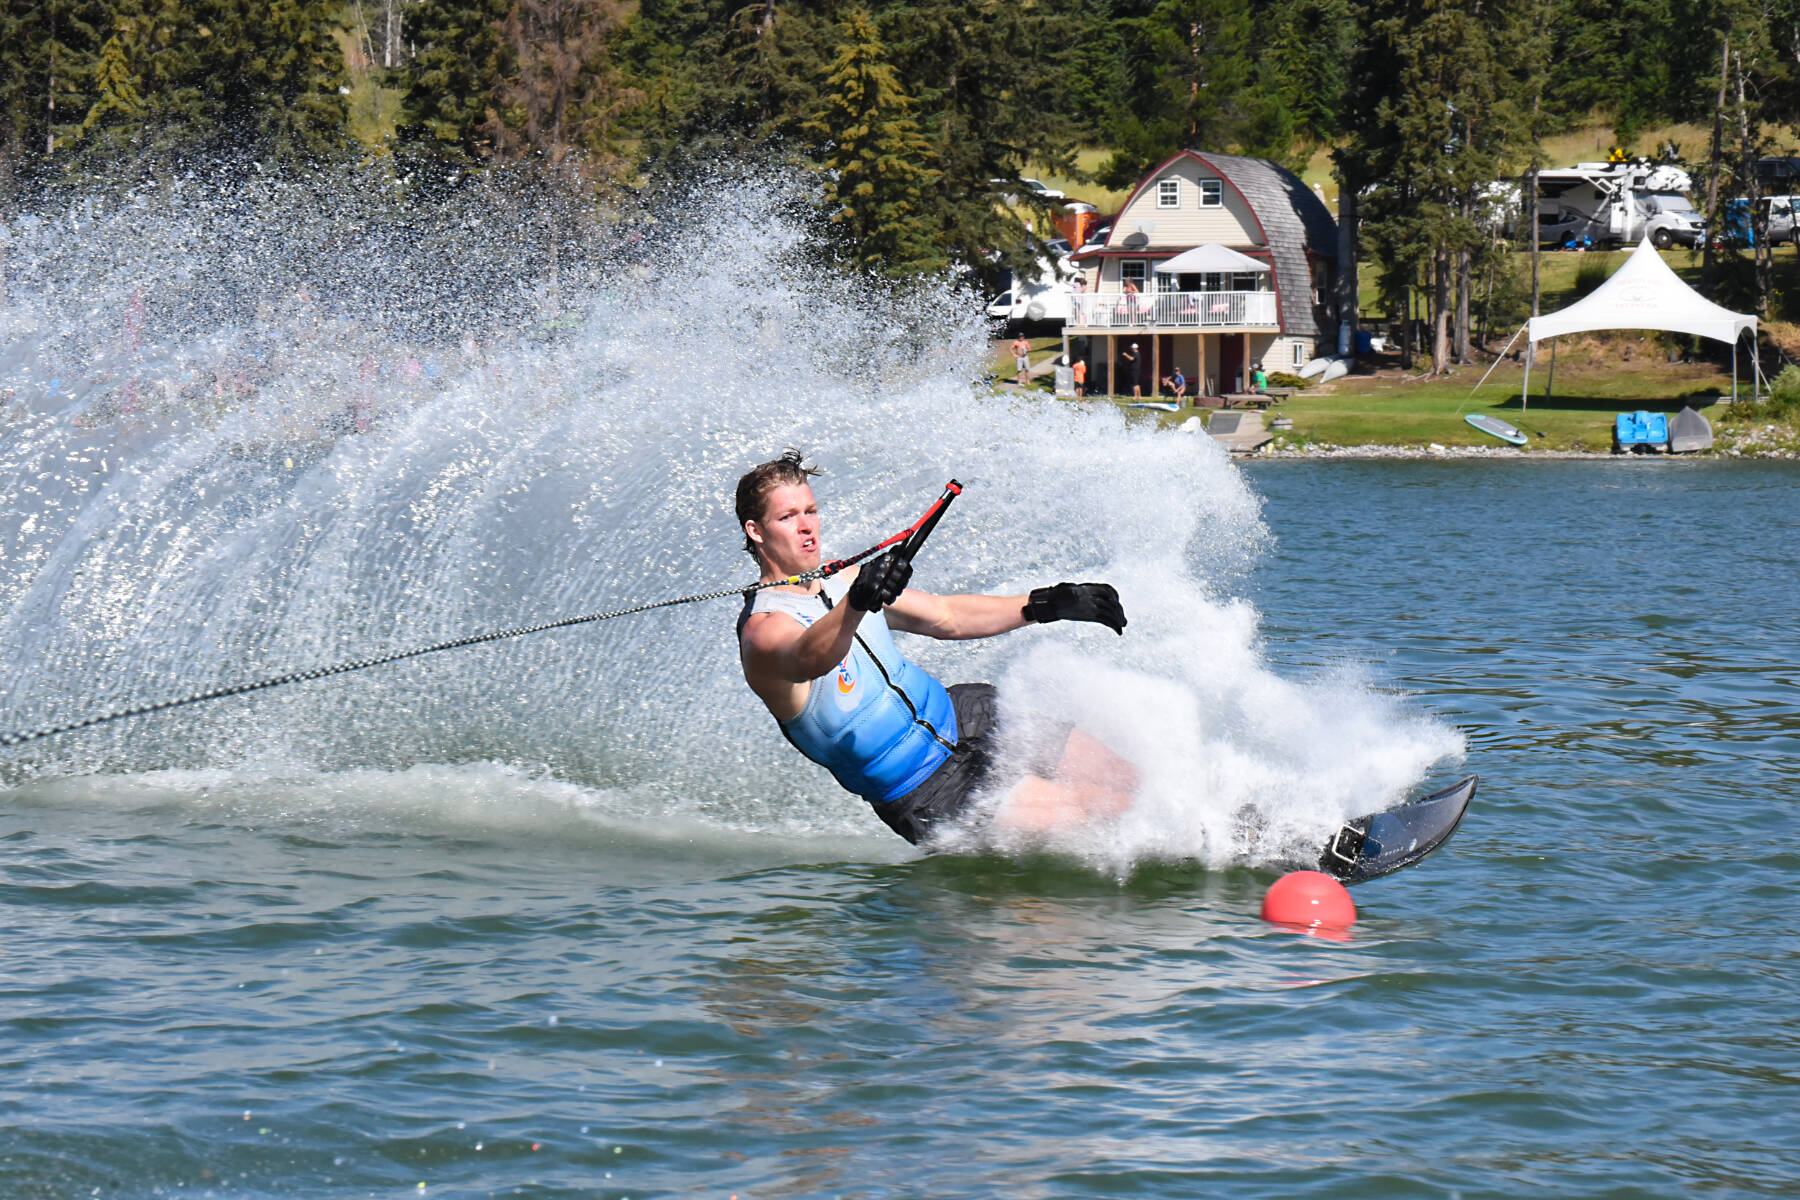 Conley Pinette competes at the 2022 B.C. Provincial Water Ski Cahampionships at Chimney Lake in August, 2022. (Angie Mindus photo - Williams Lake Tribune)